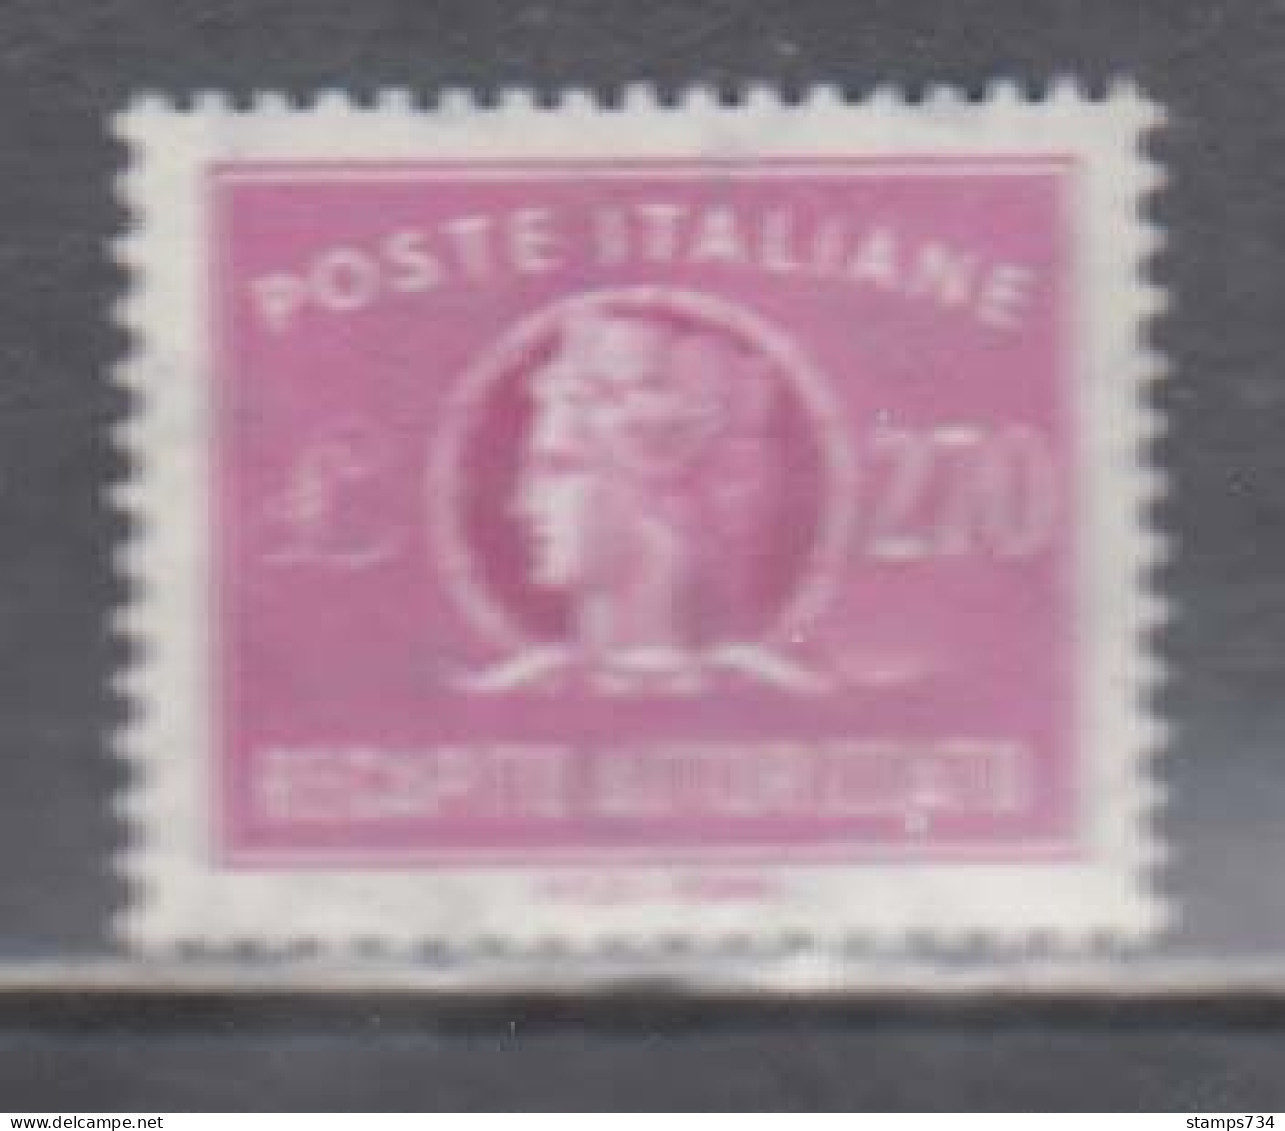 Italy 1987 - Consigned Parcels, Mi-Nr. 15, MNH** - Consigned Parcels